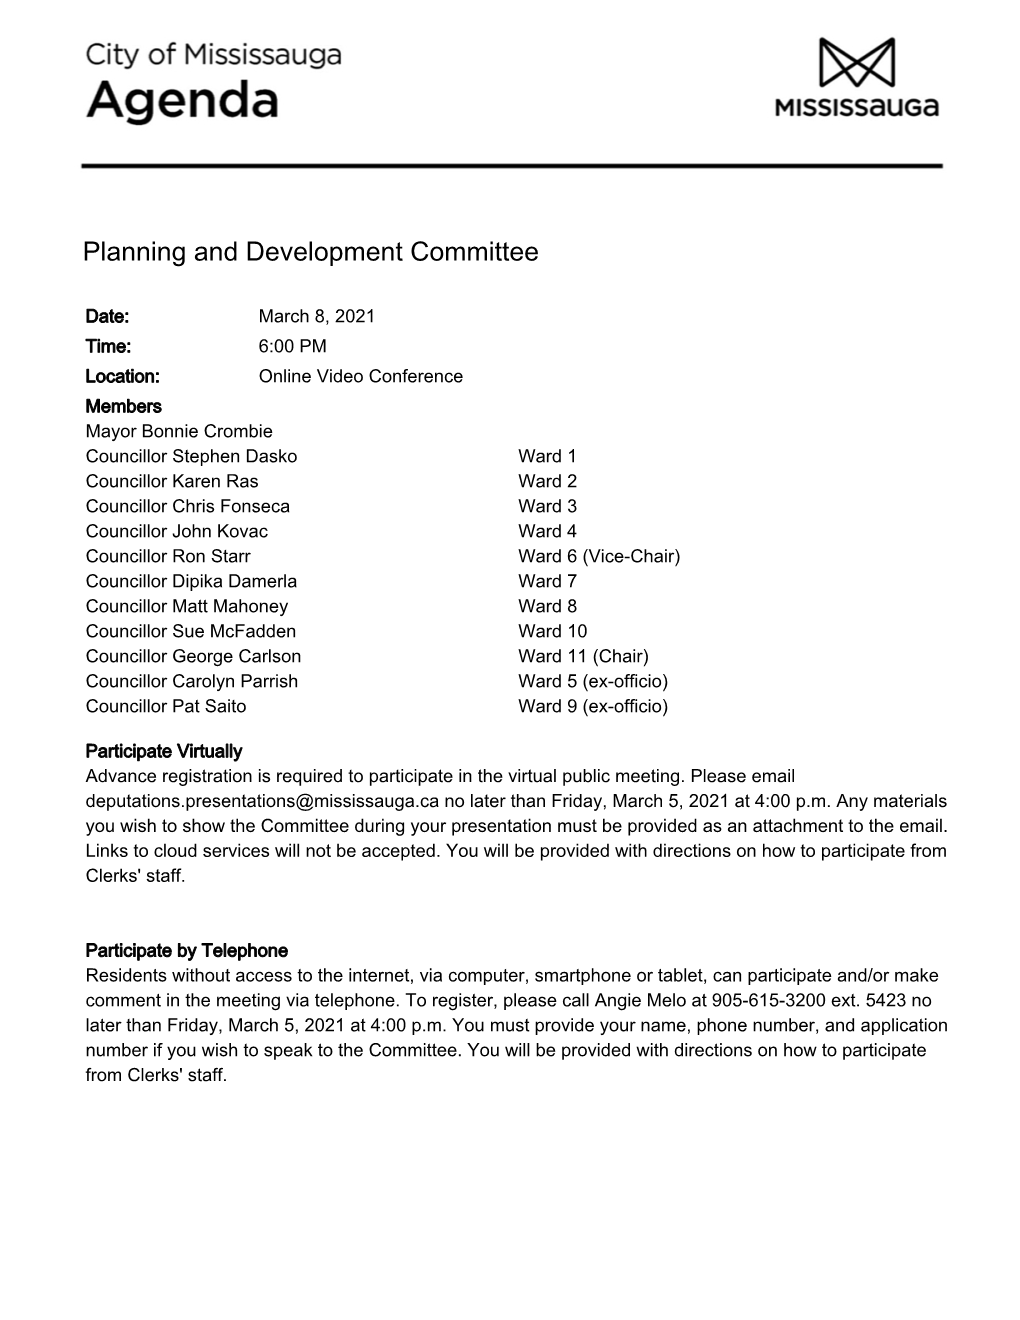 Planning and Development Committee